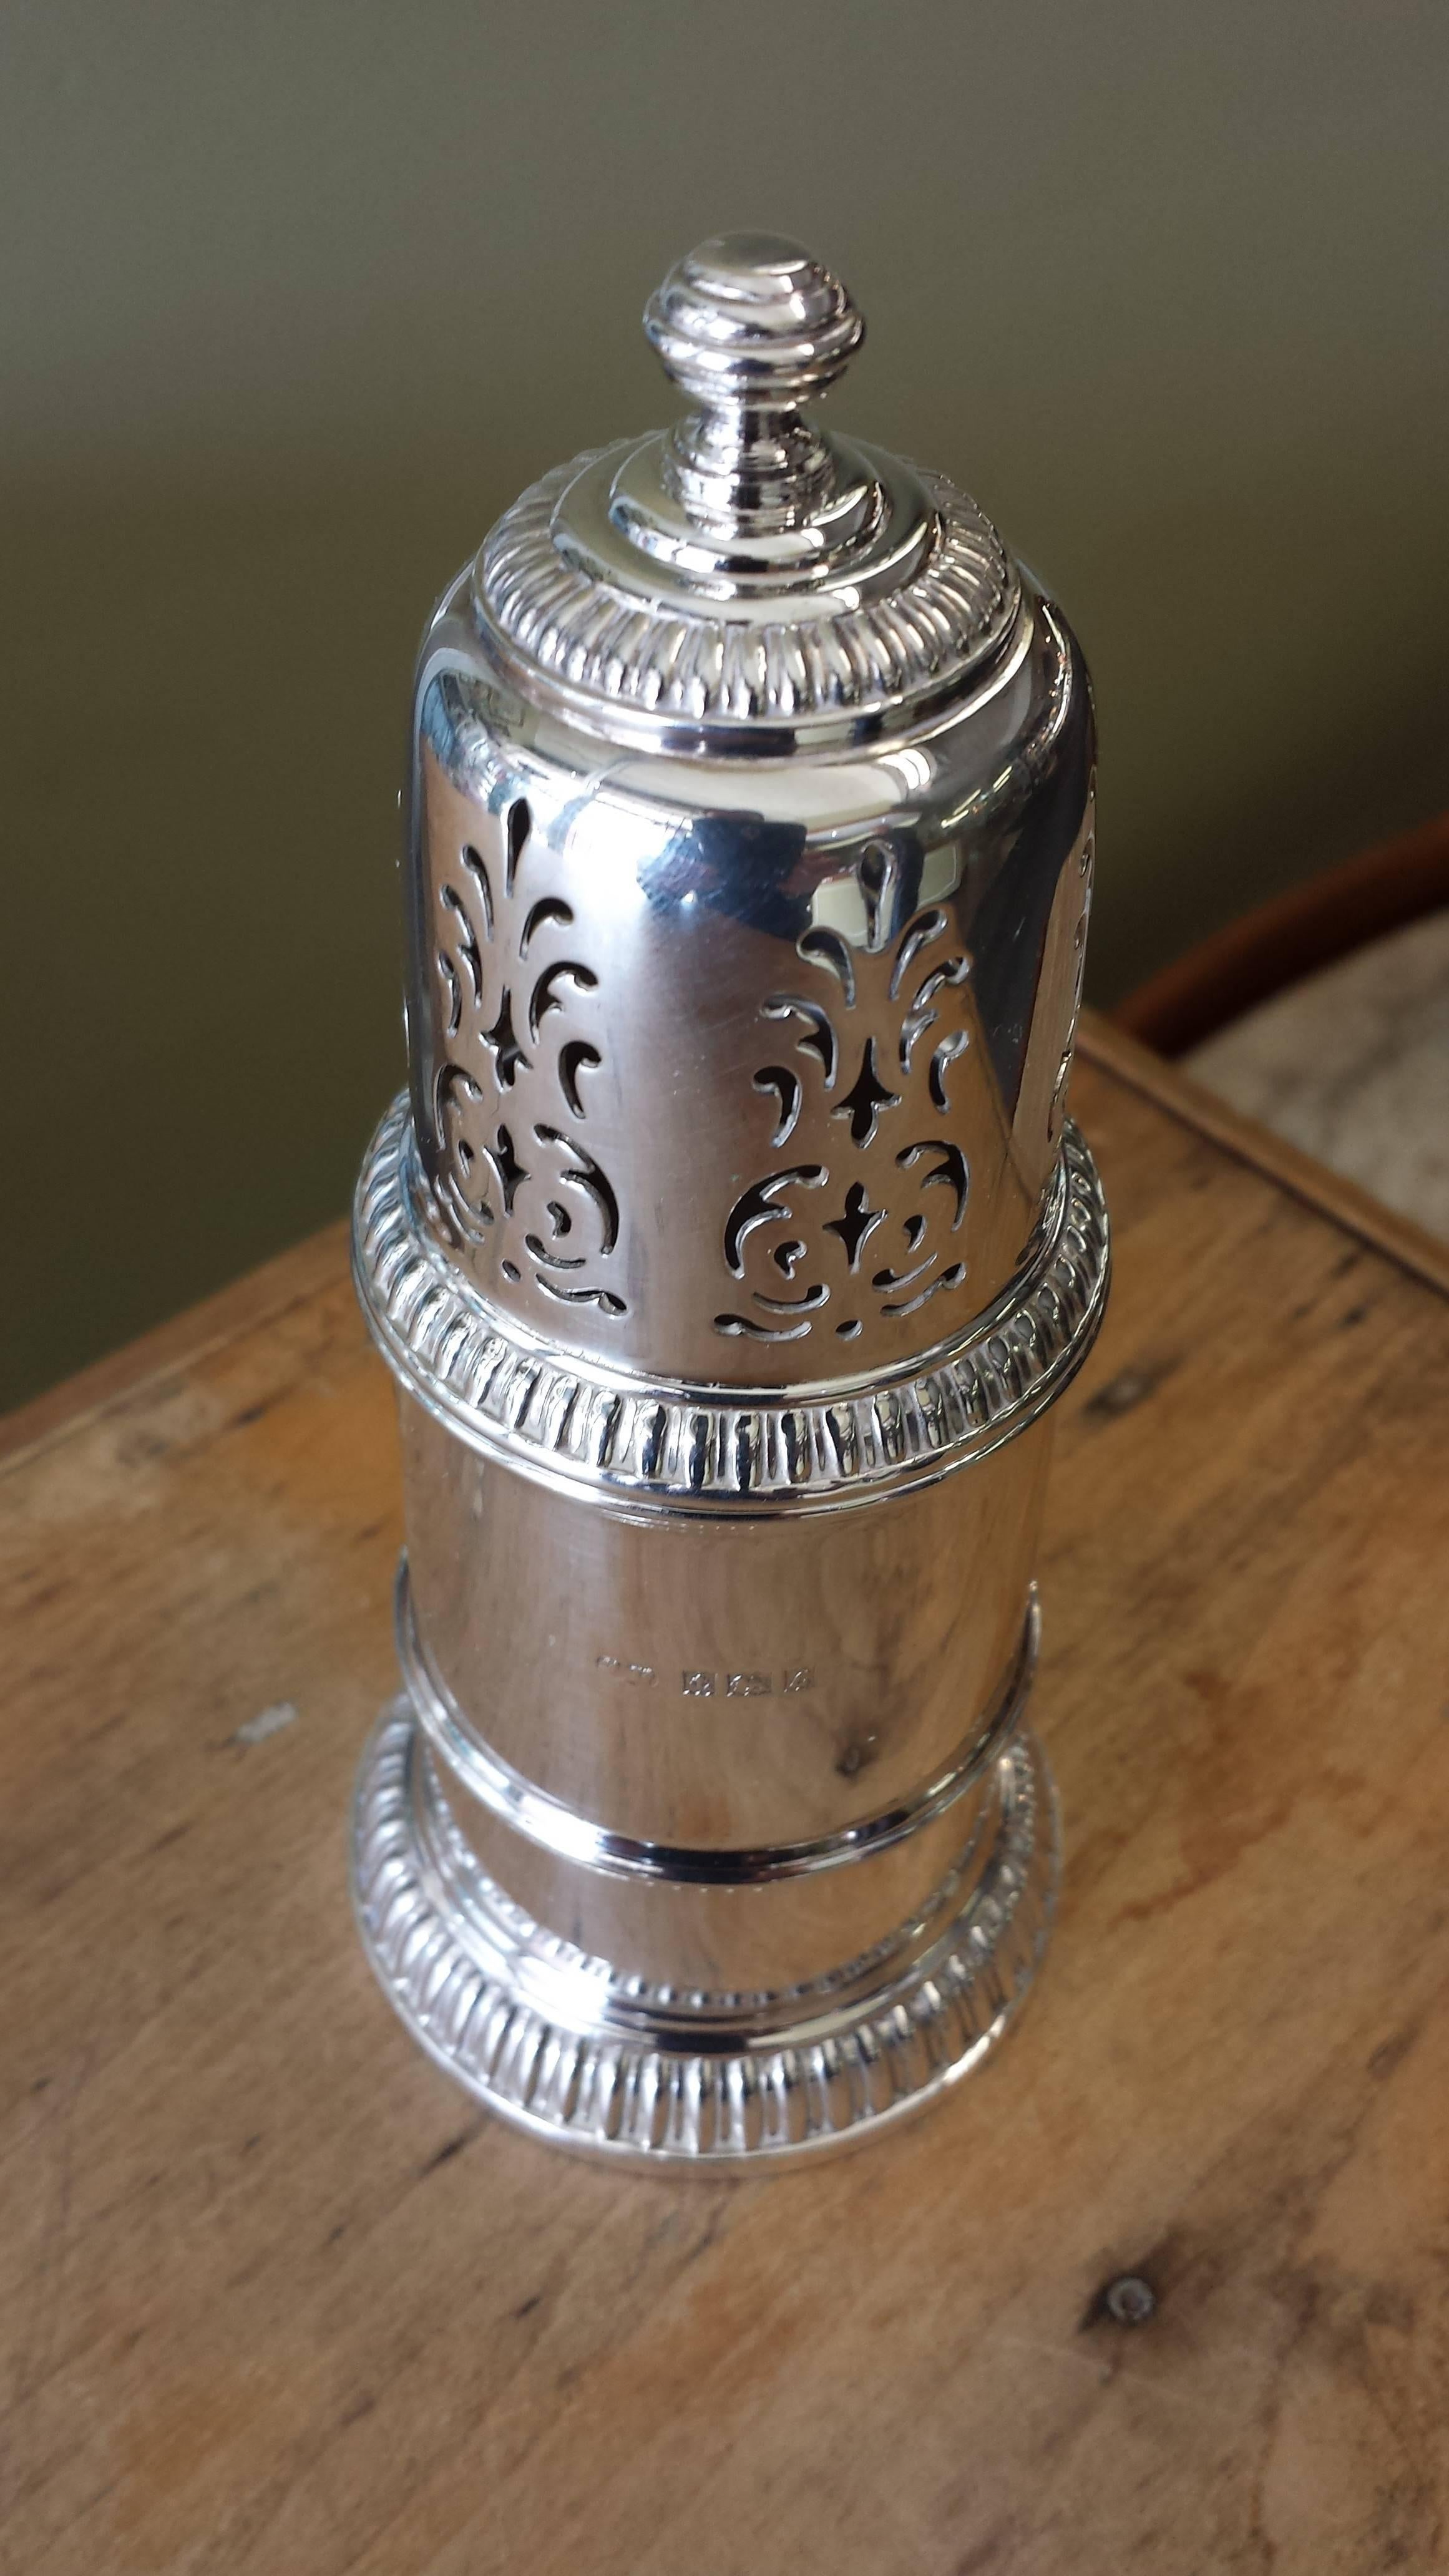 Sugar caster, Birmingham England, hallmarked sterling silver, date letter appears to be fro 1960, in very good condition. No issues, the caster/shaker measures 5 1/4"-inches high x 2 3/8"-inches in diameter.